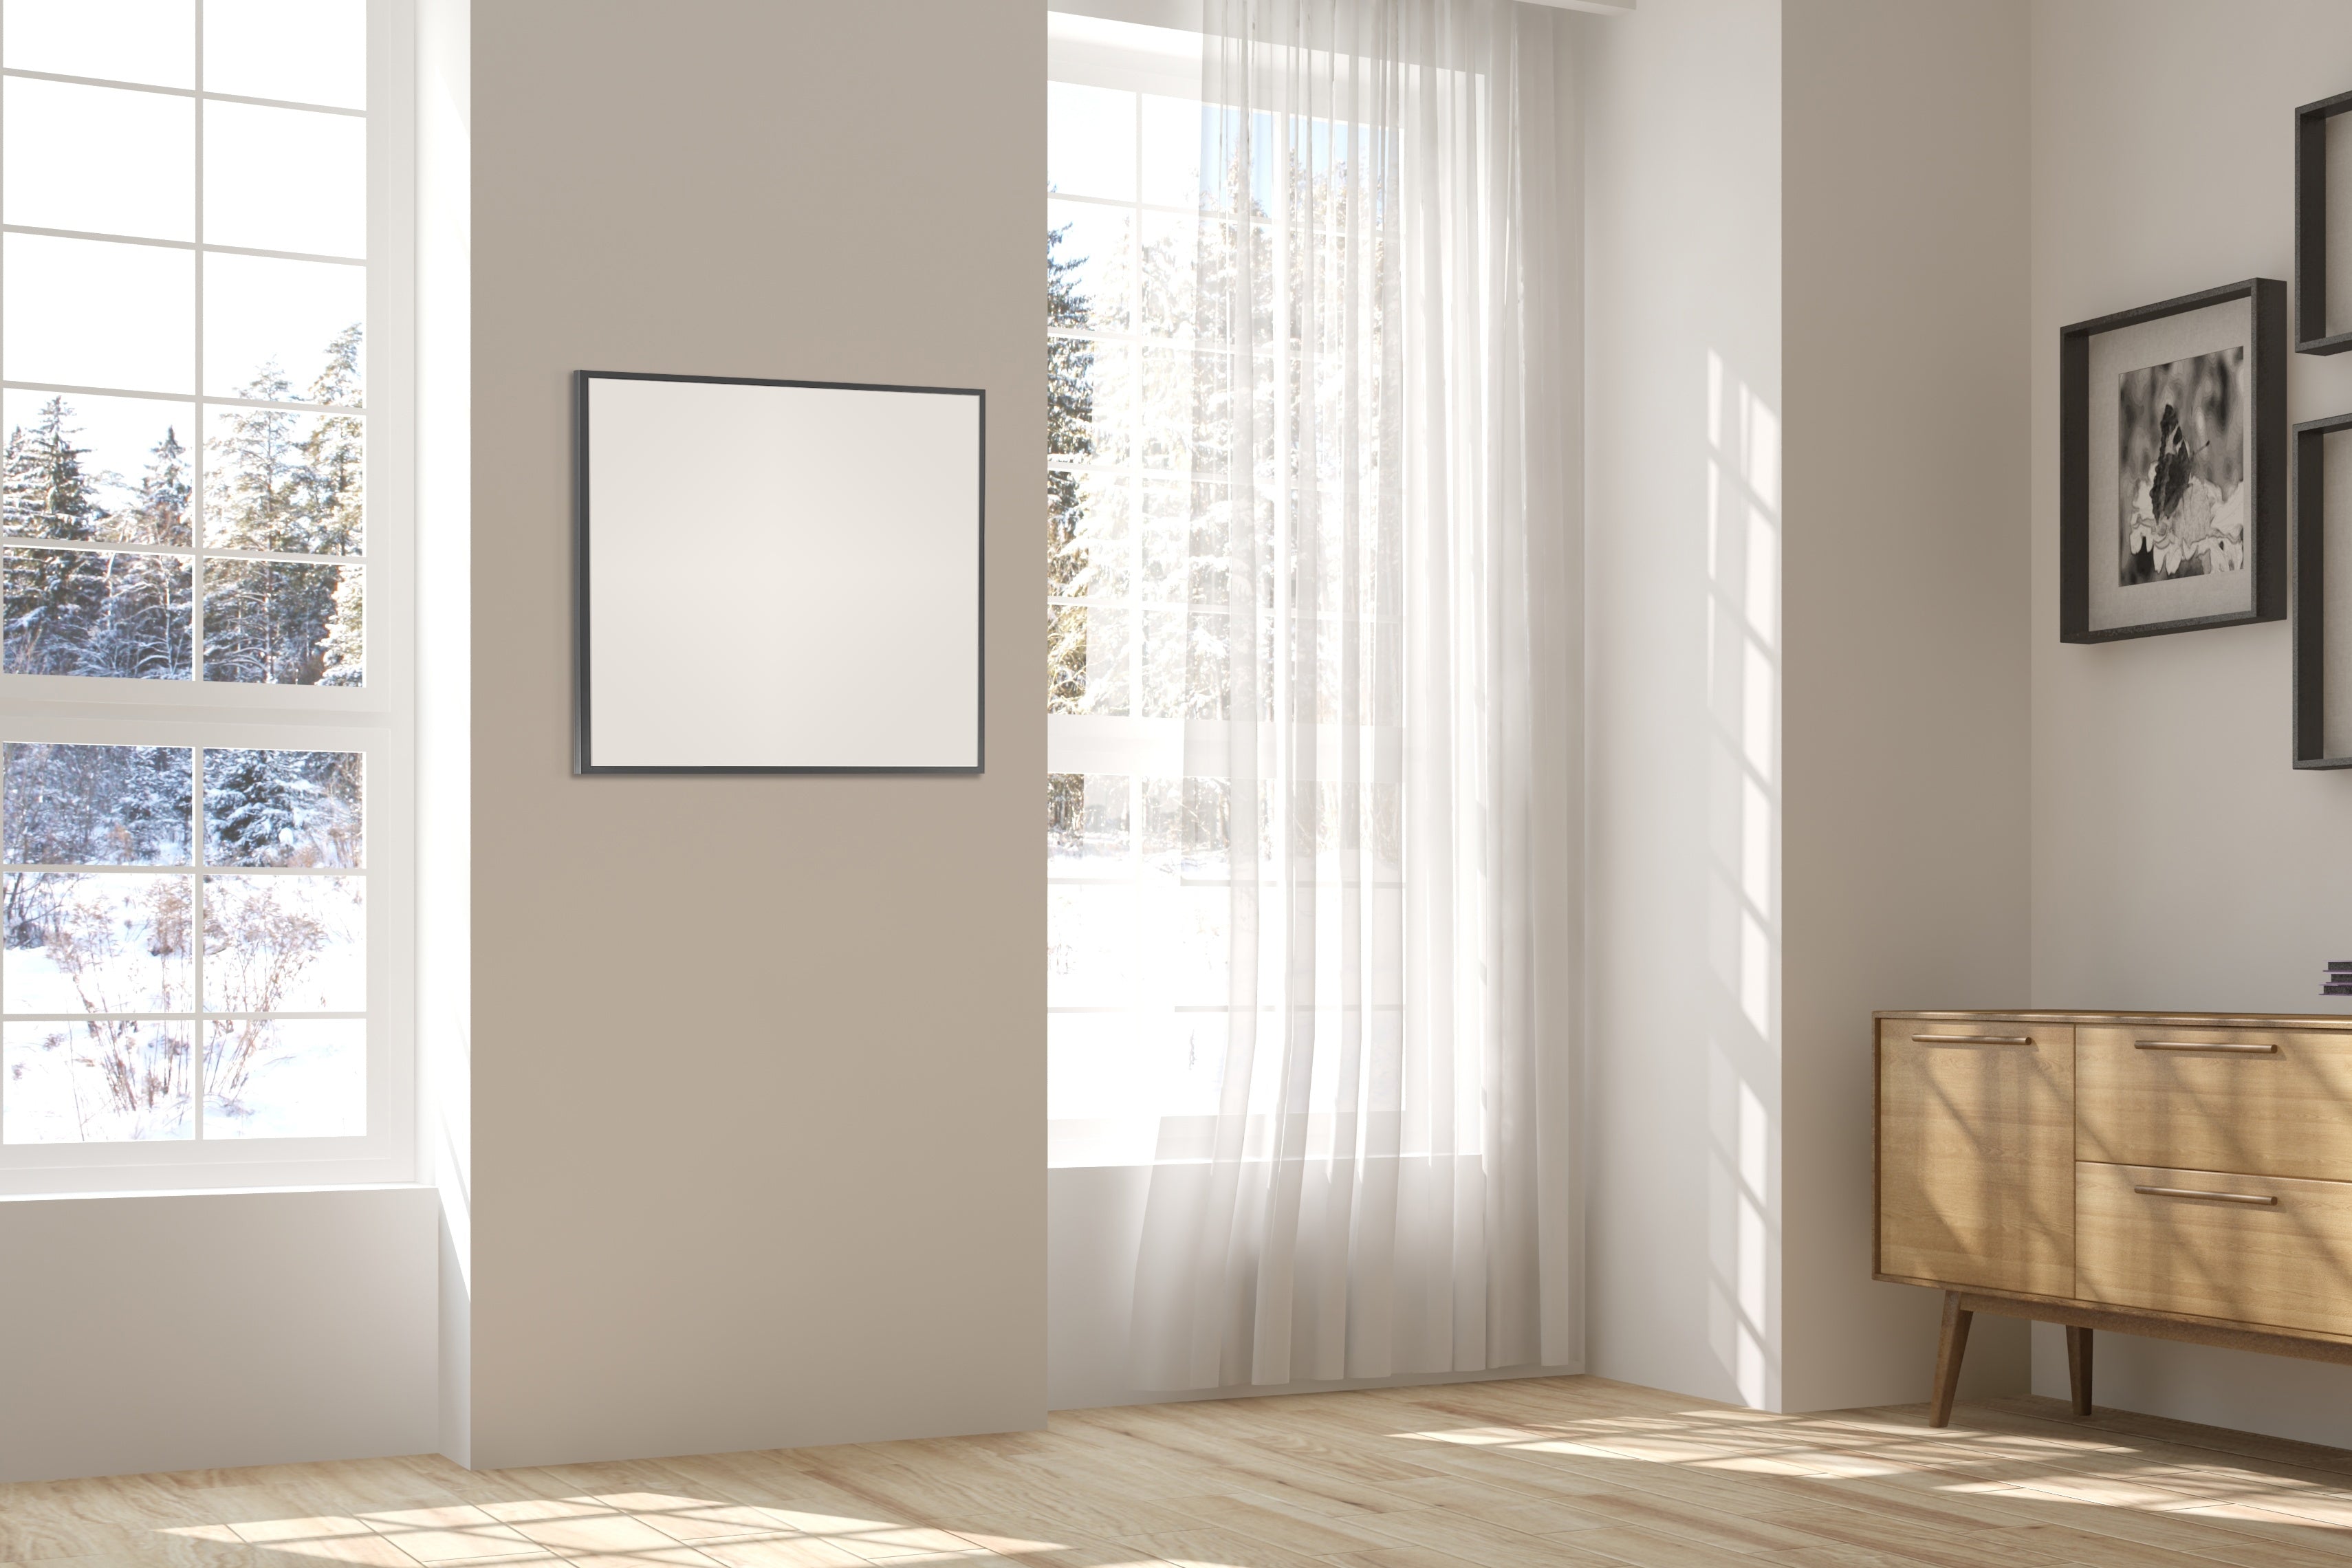 350W Classic Infrared Heating Panel